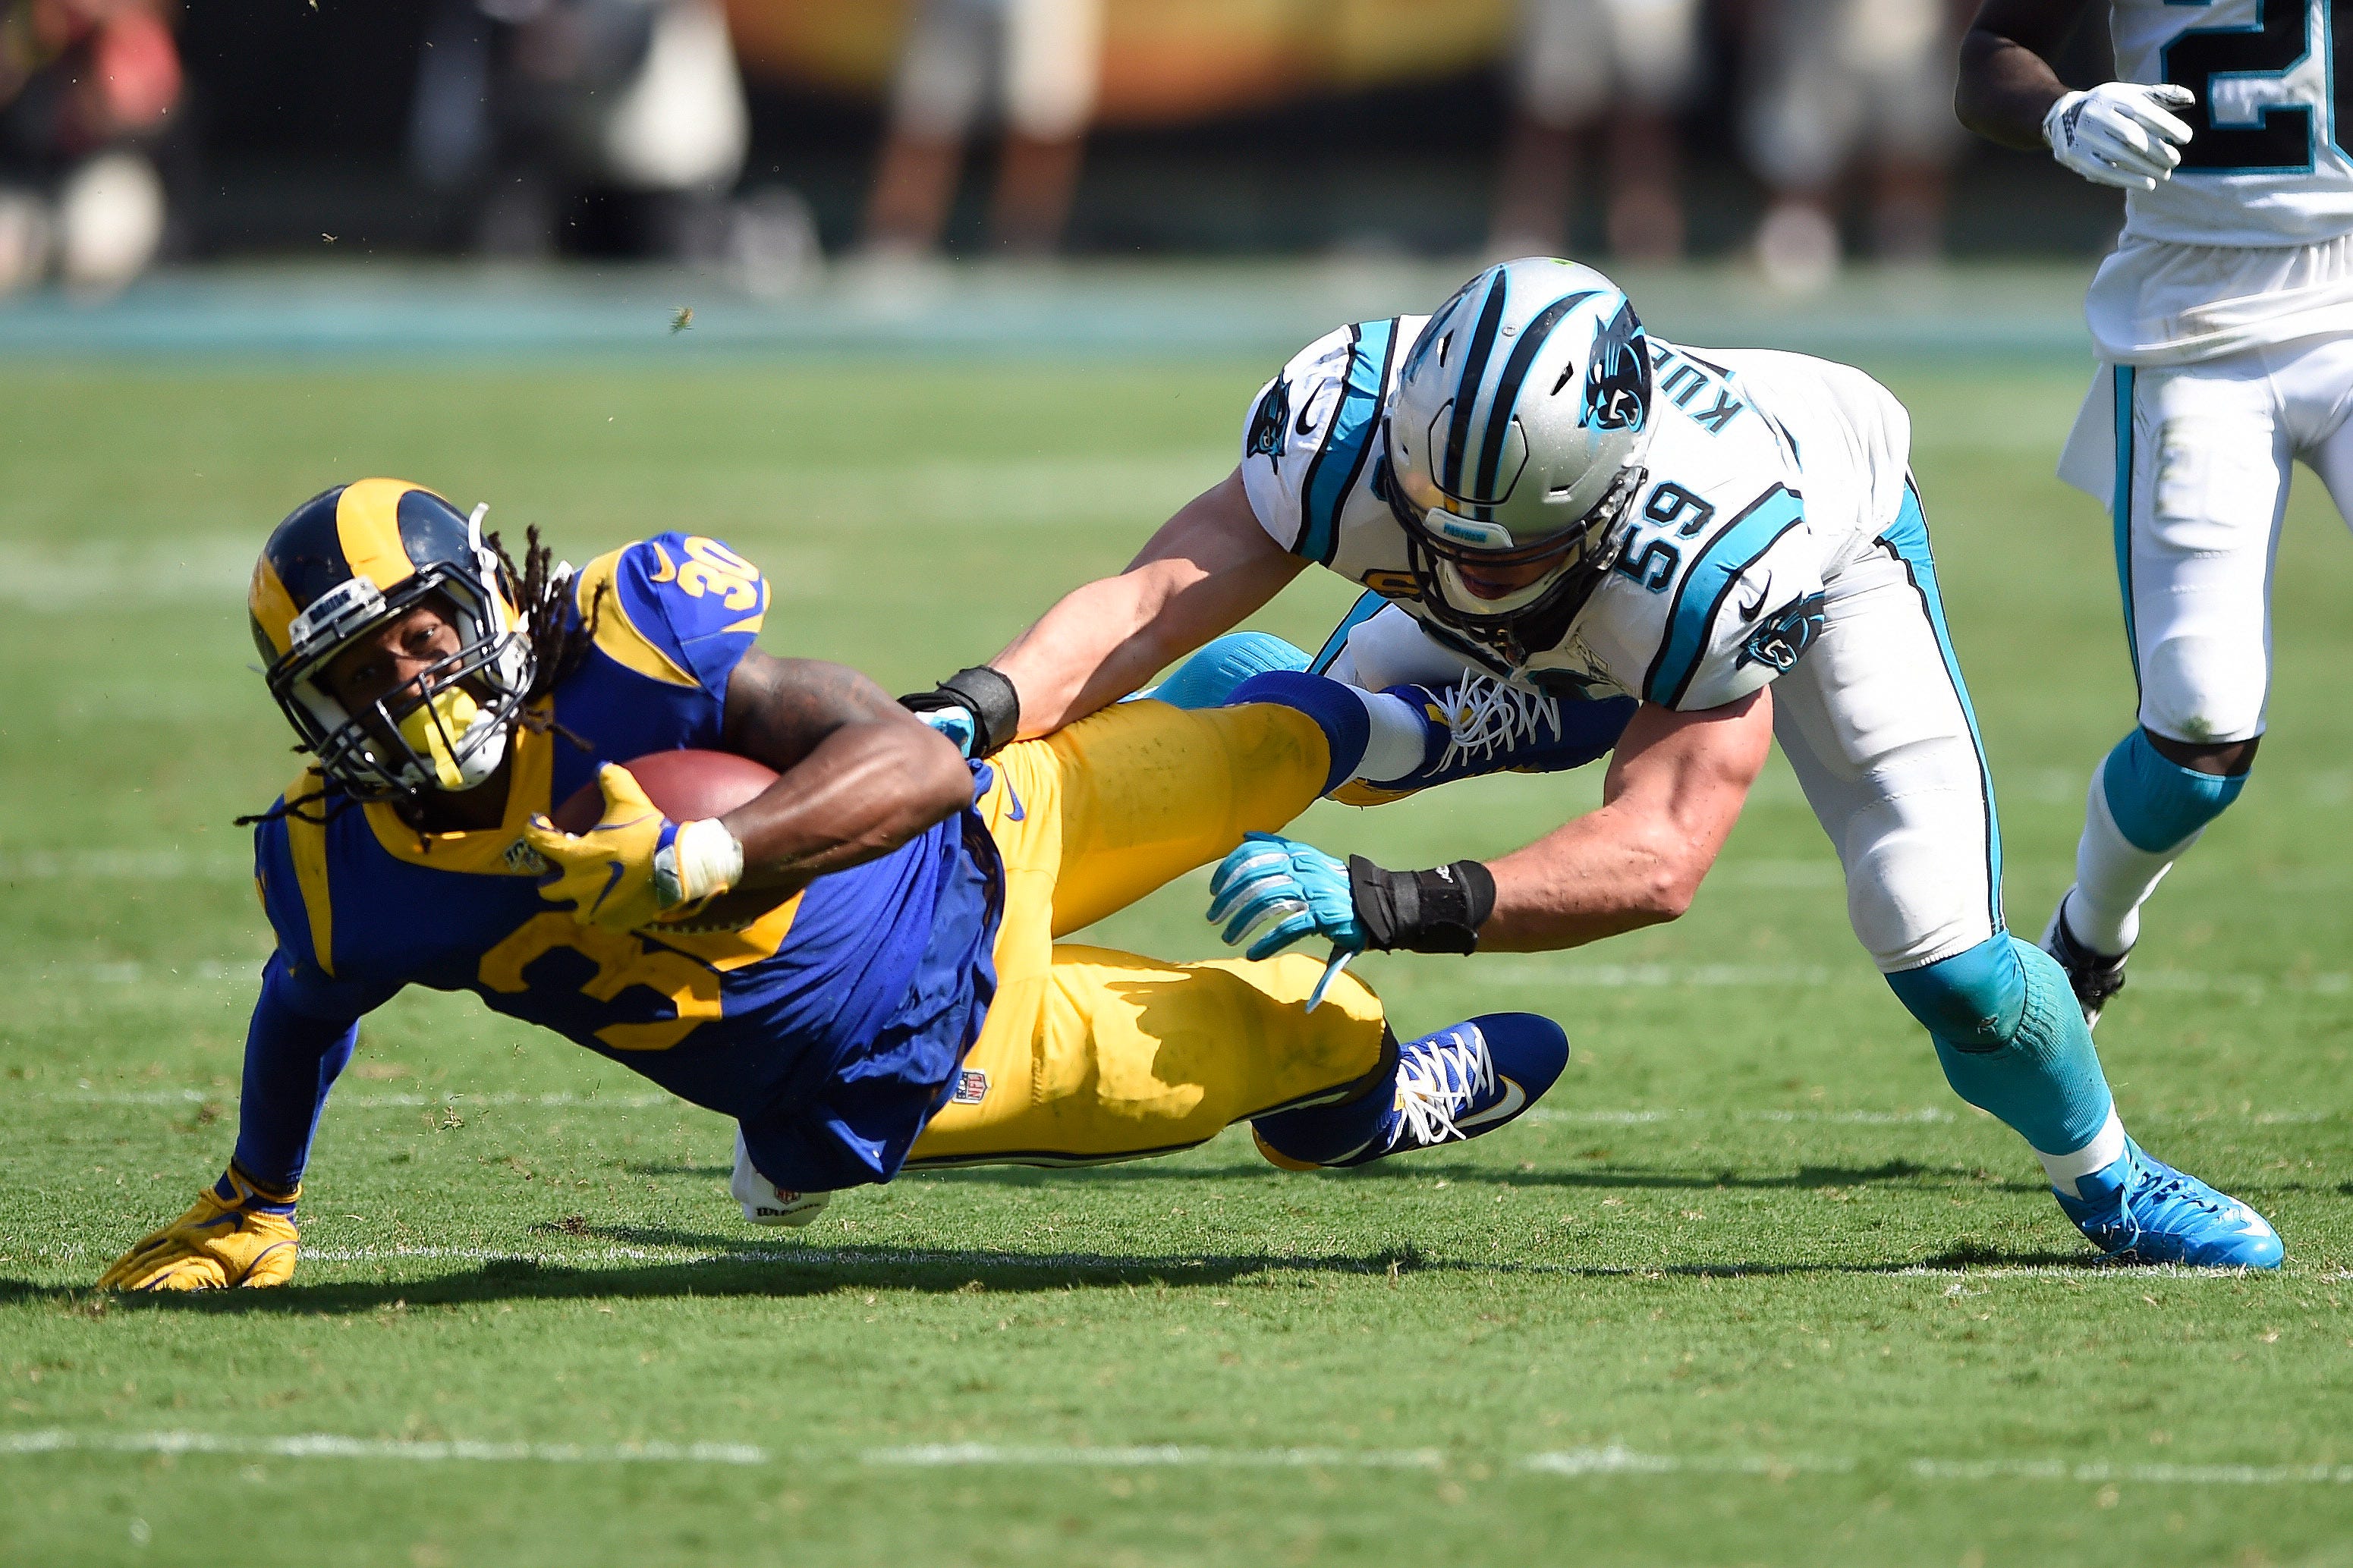 Gurley helps lead Rams to 30-27 win over Panthers